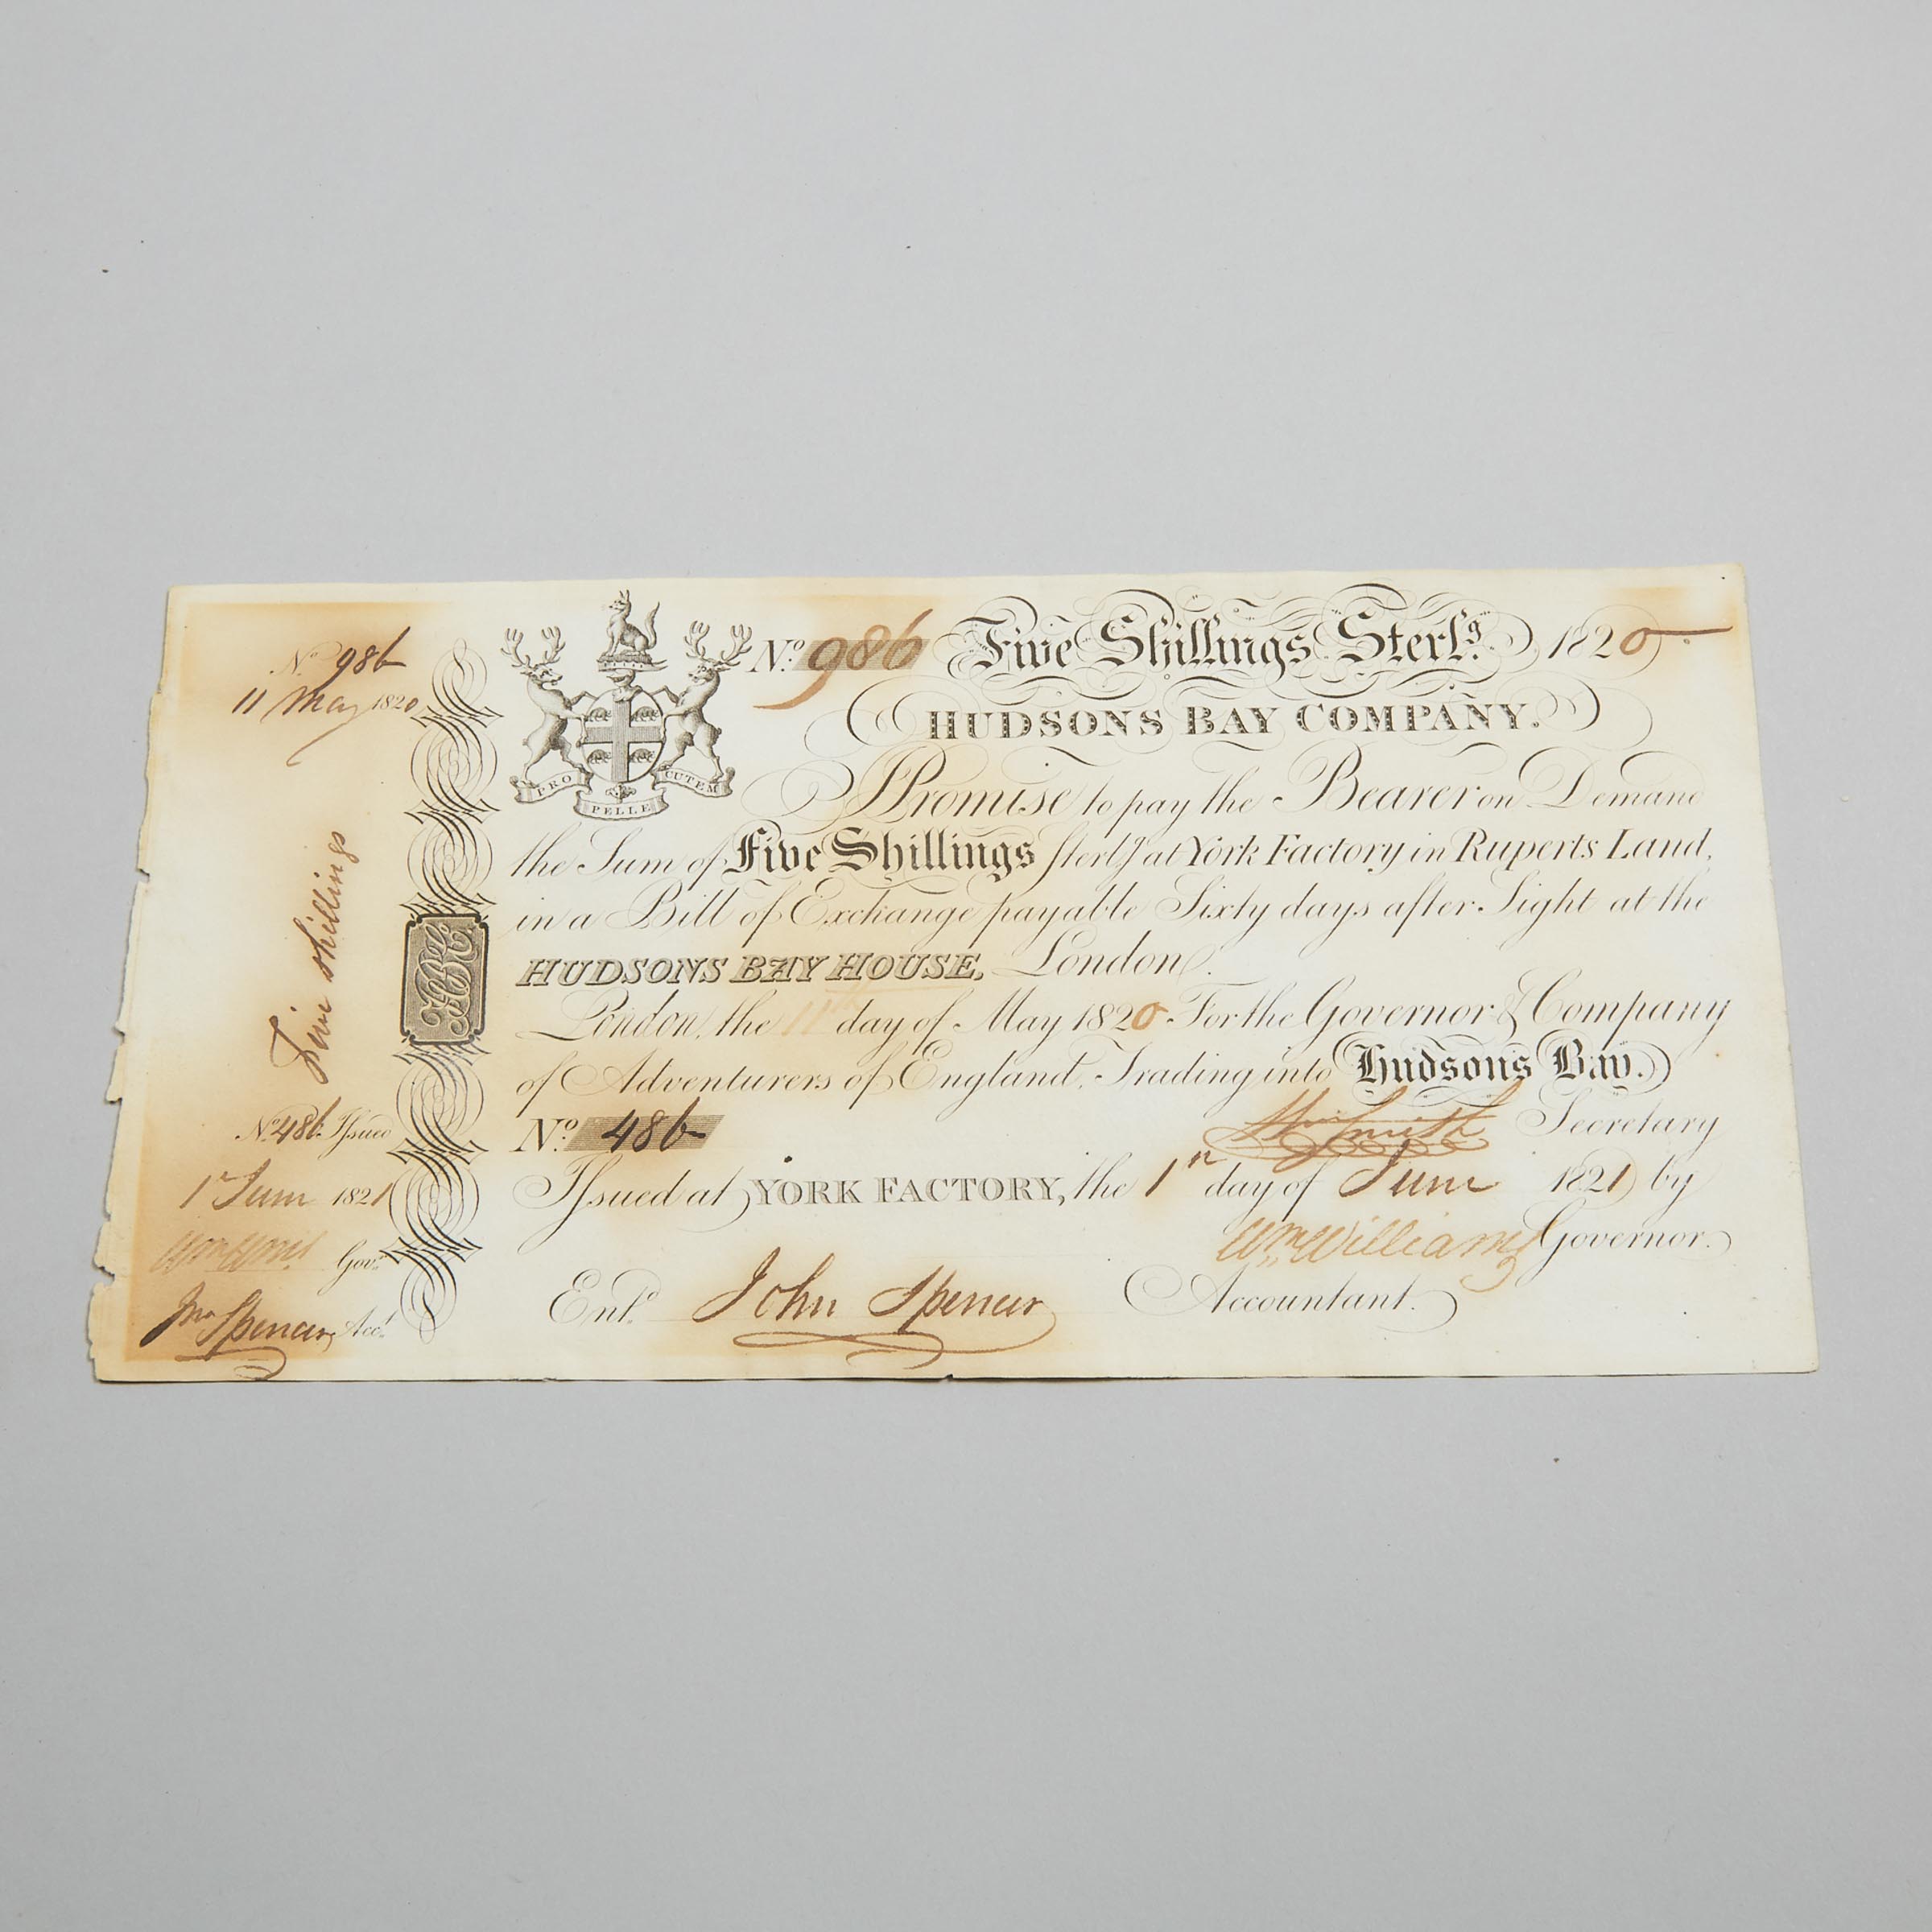 Hudson's Bay Company Five Shillings Promissory Note, 11 May 1820